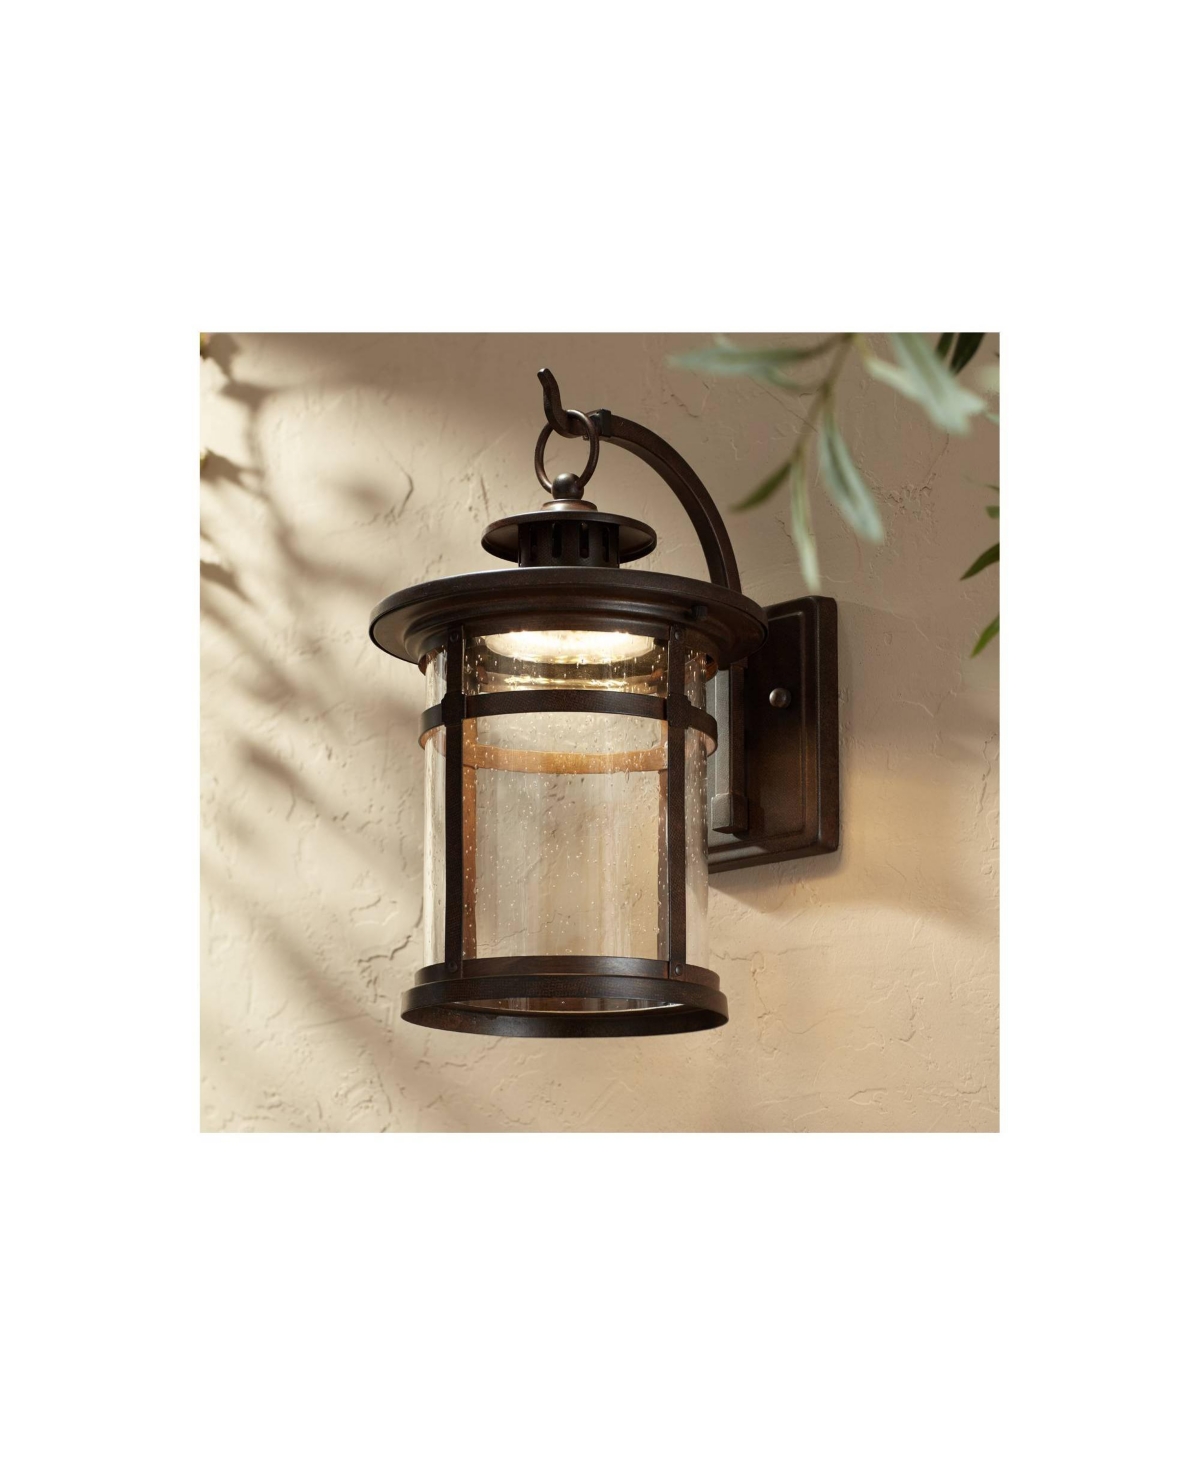 Callaway Rustic Outdoor Wall Light Fixture Led Bronze Steel 14 1/2" Clear Seedy Glass Lantern for Exterior House Porch Patio Outside Deck Garage Yard